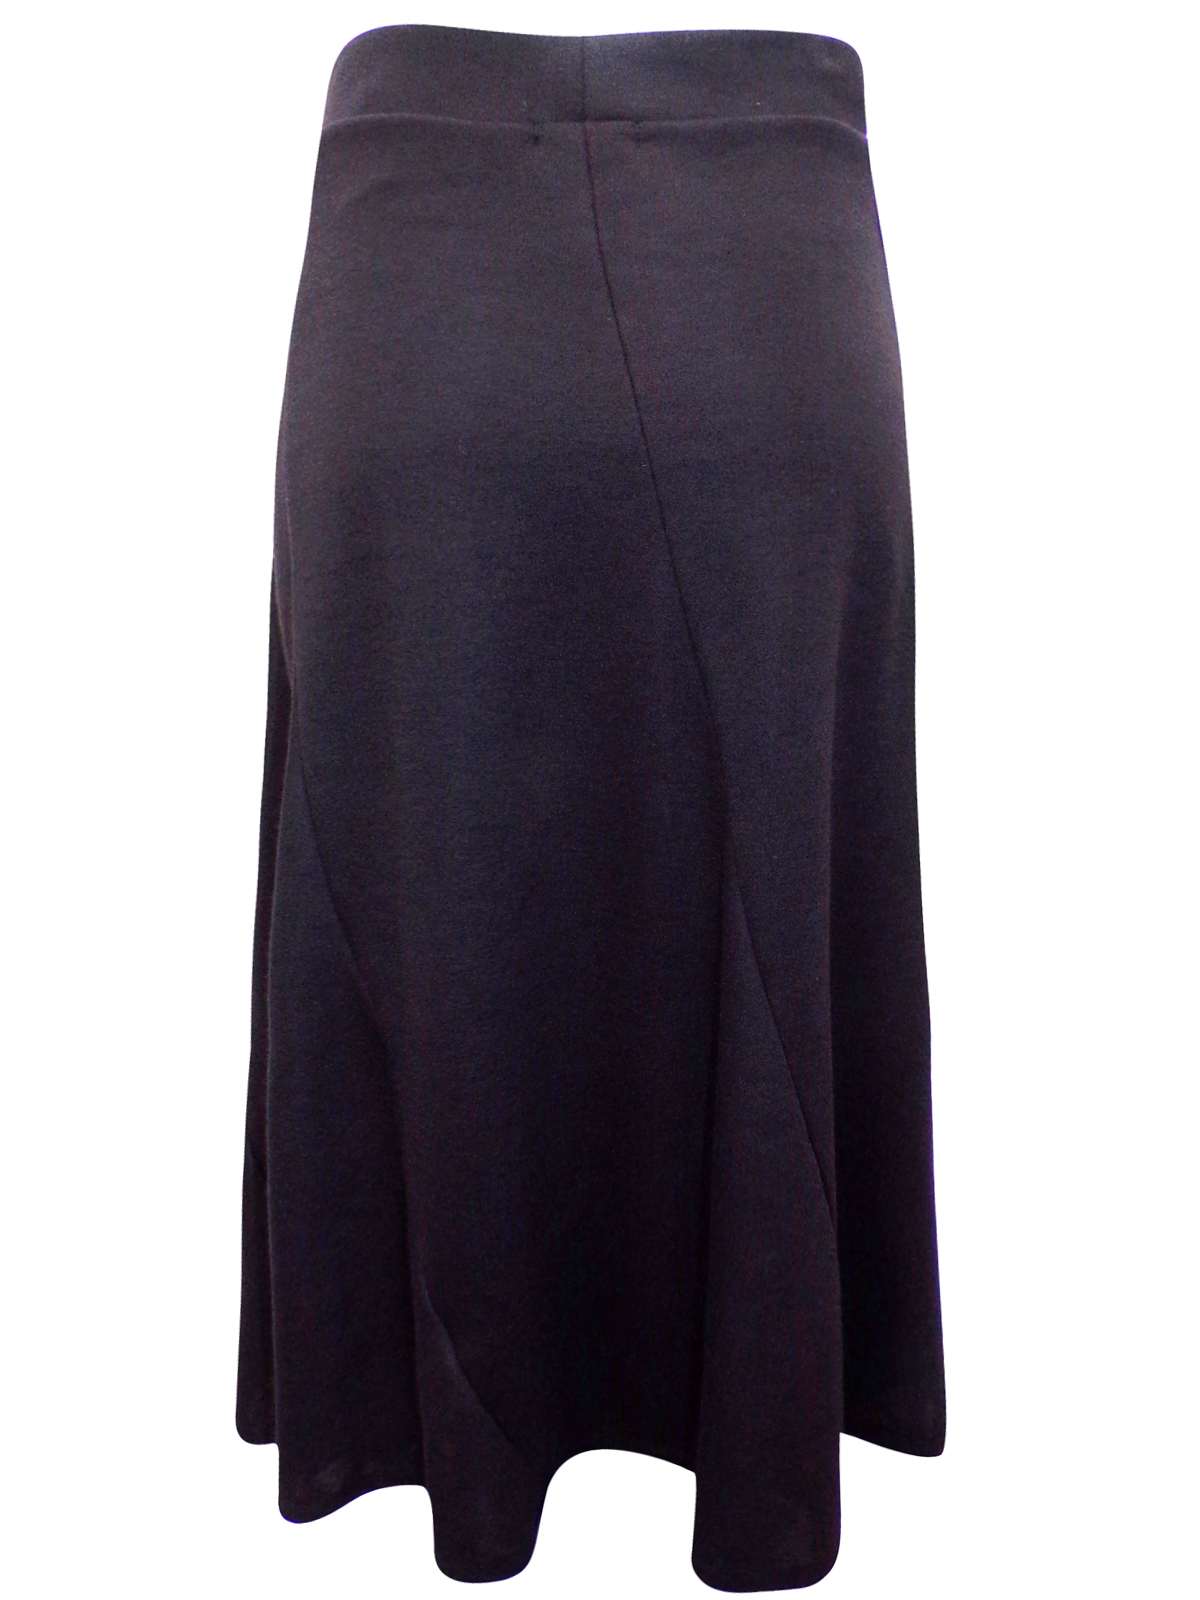 First Avenue BLACK Pull On A-Line Panelled Skirt - Size 12 to 16